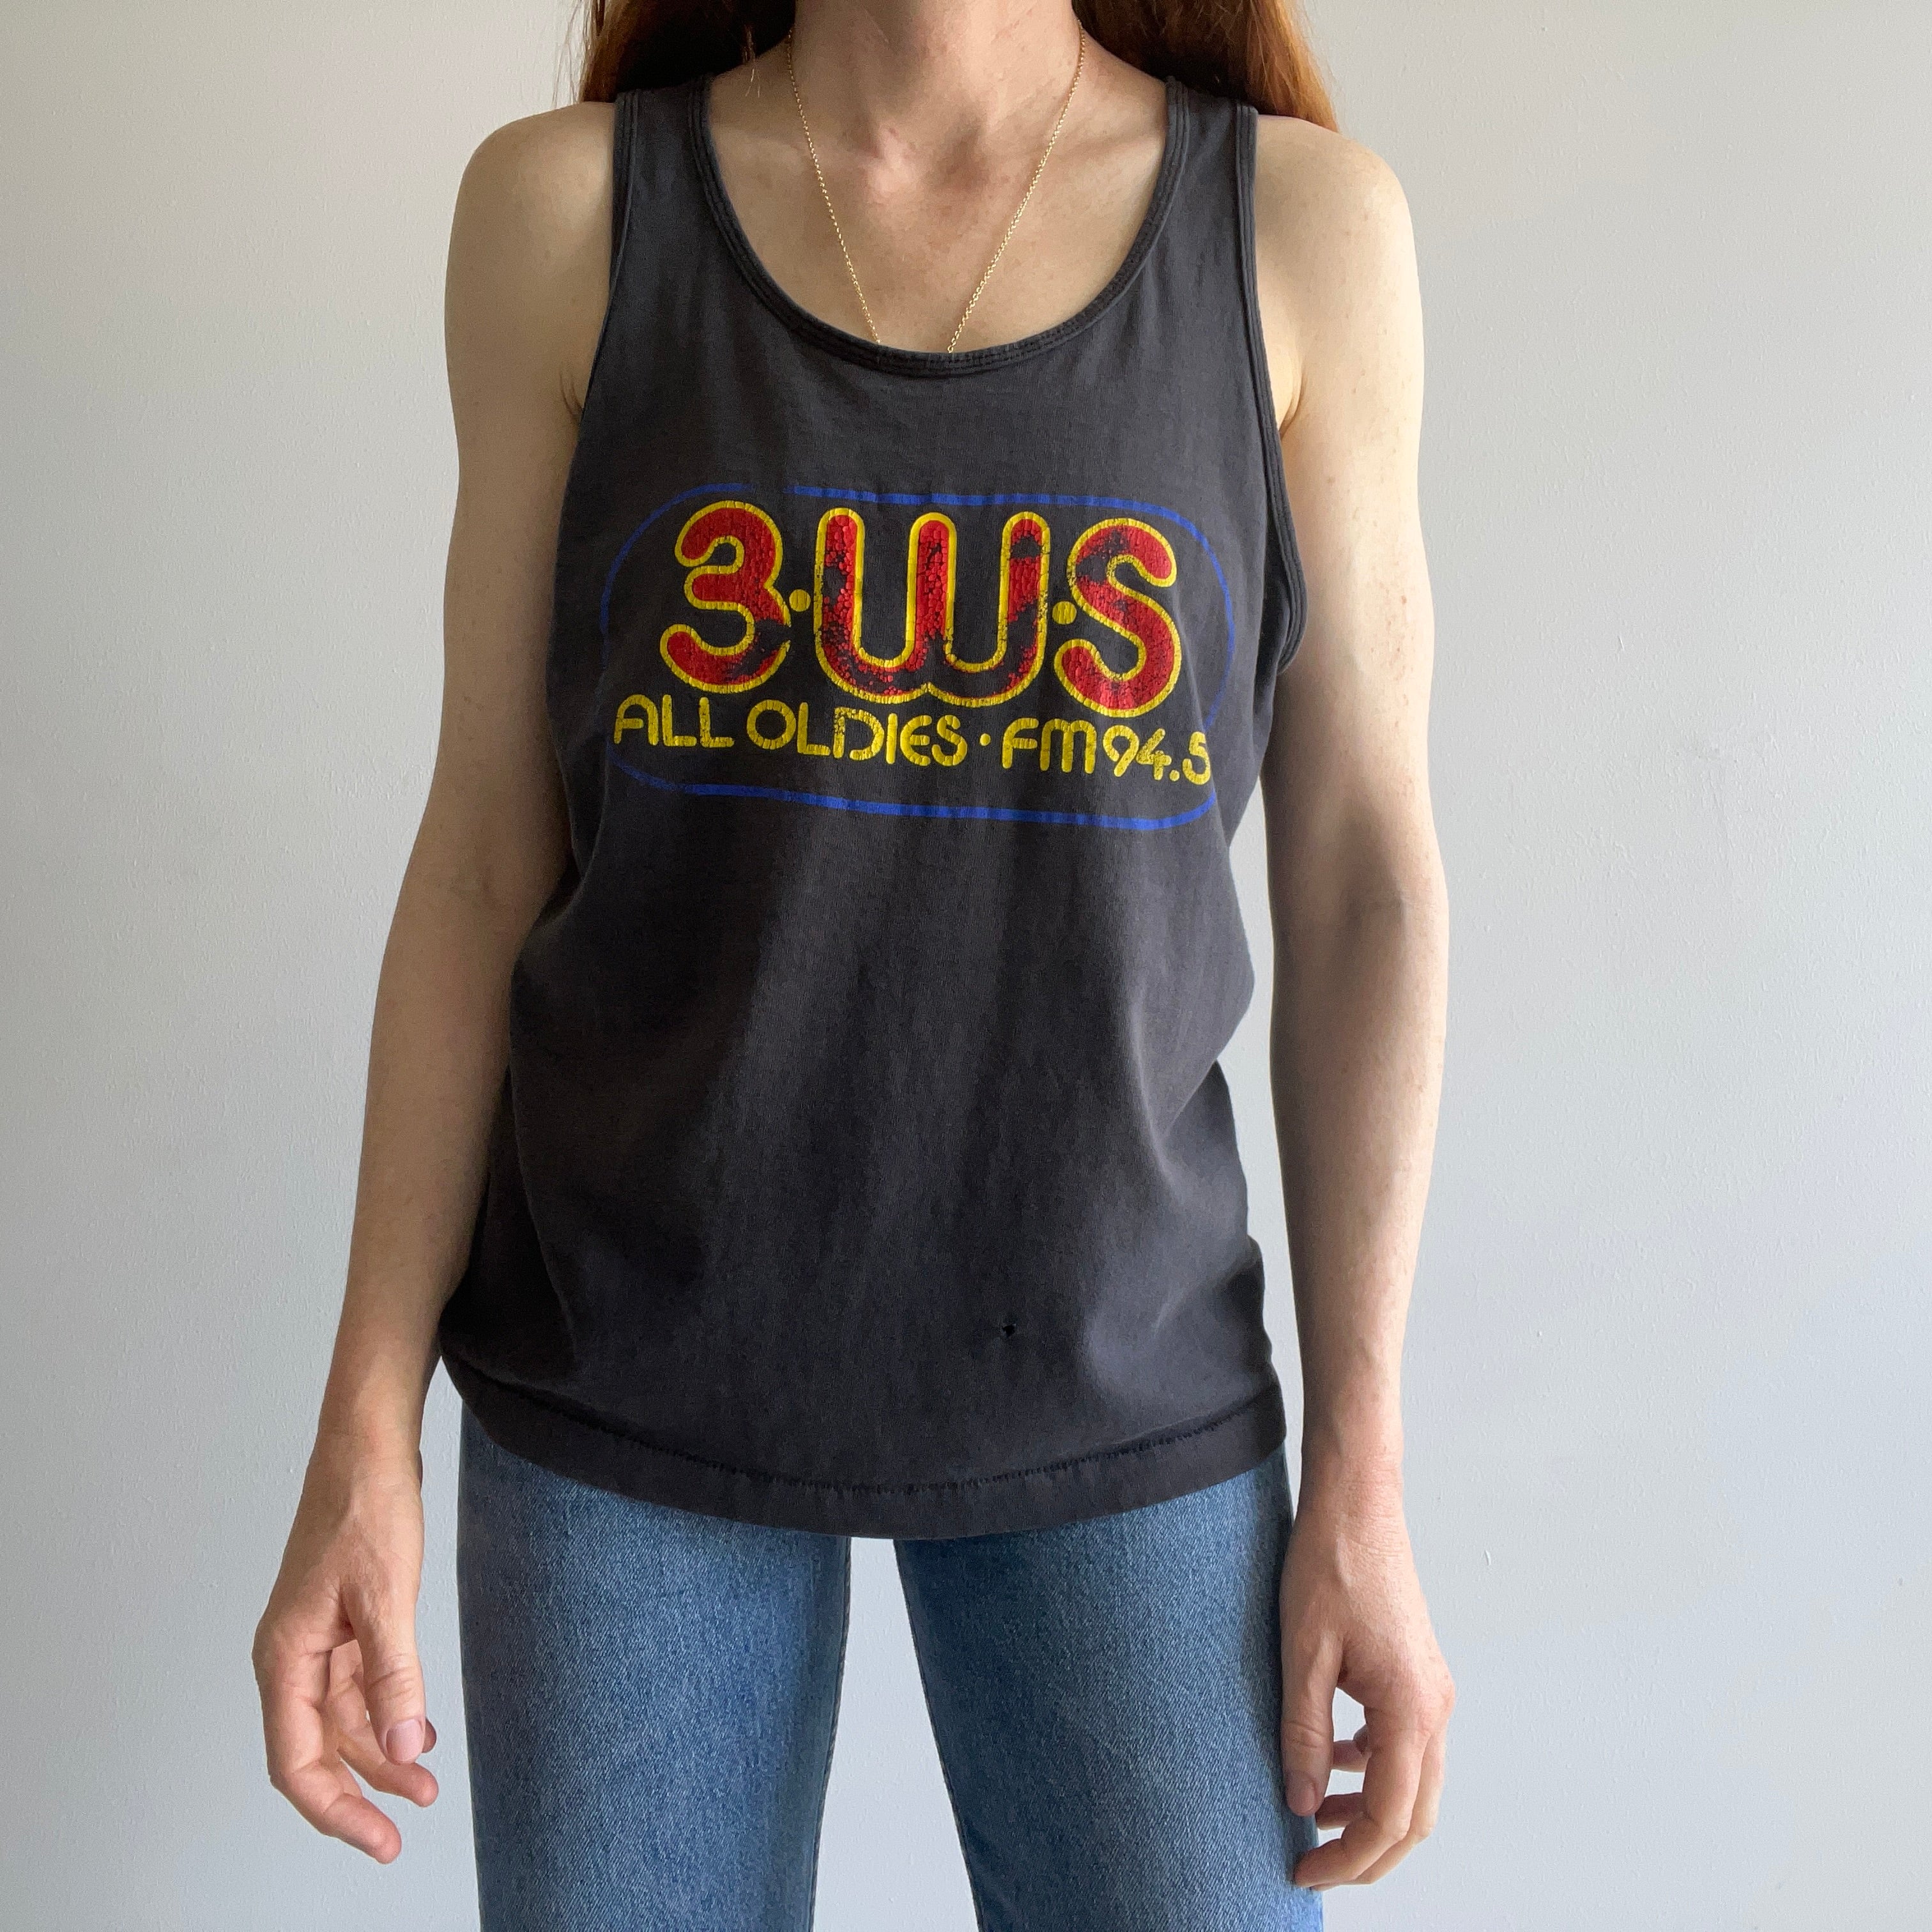 1980s Pittsburgh 3WS All Oldies FM94.5 Thrashed Tank Top